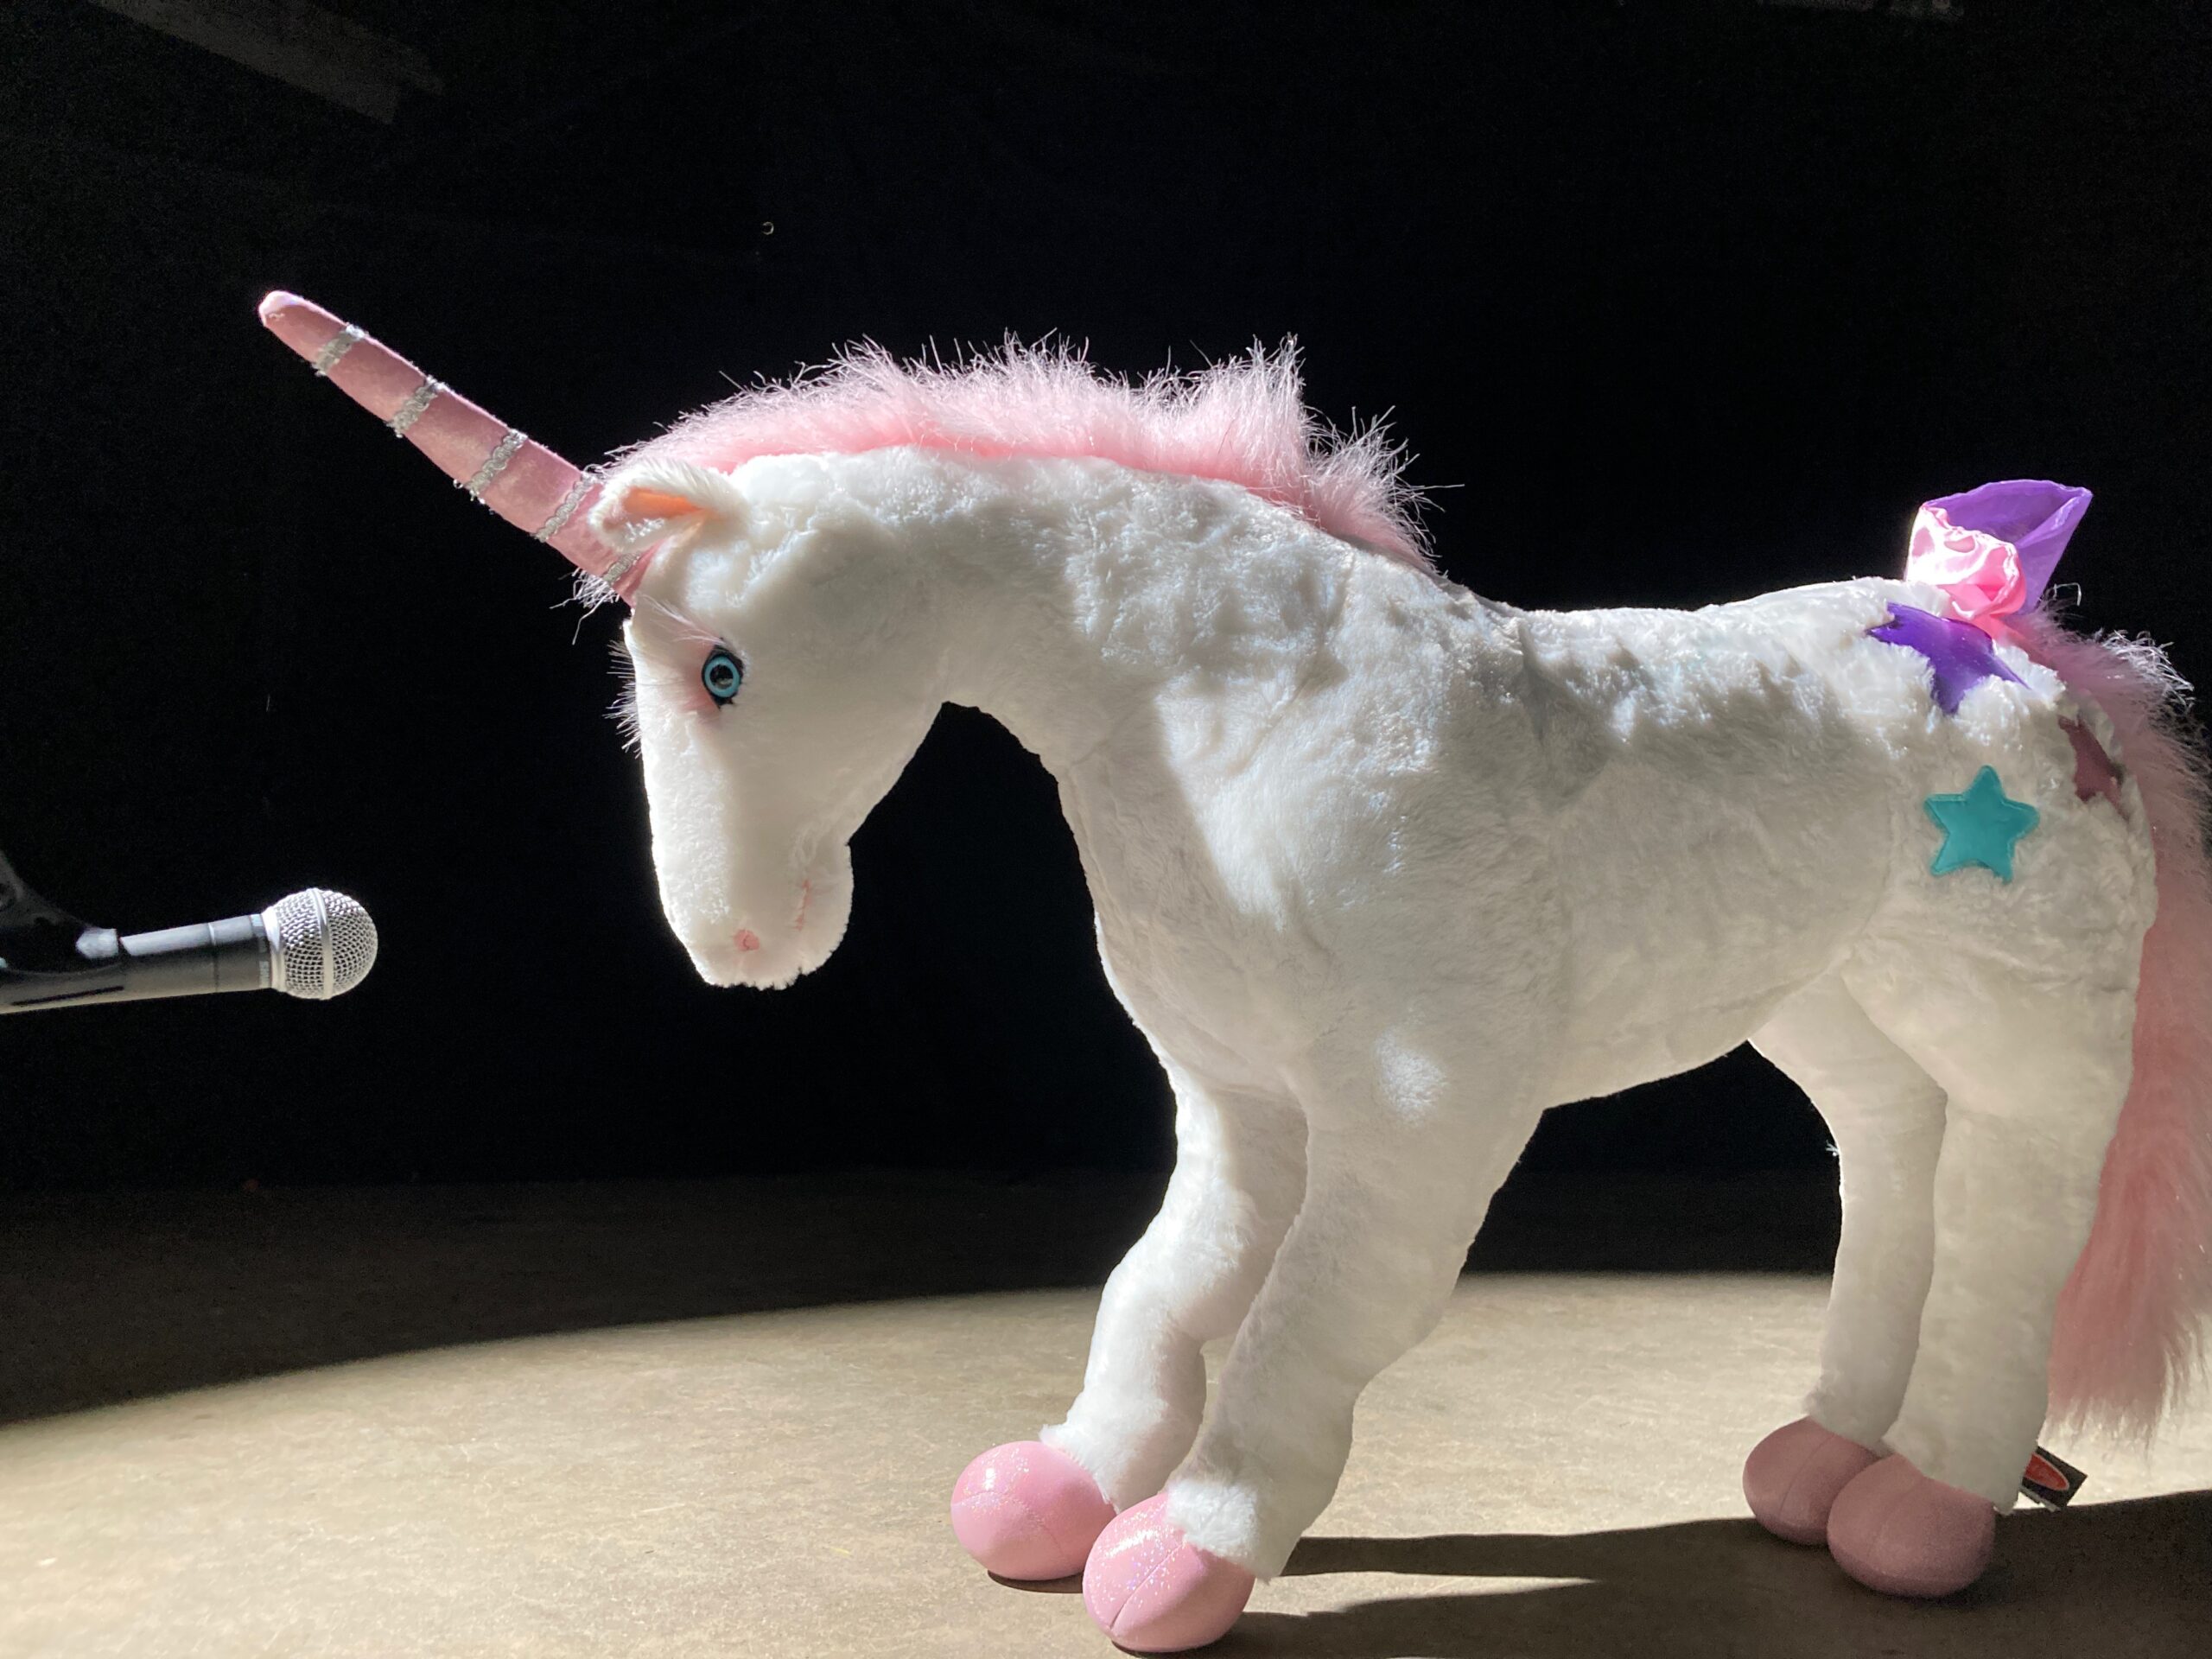 A stuffed unicorn on a stage standing in front of a mic.